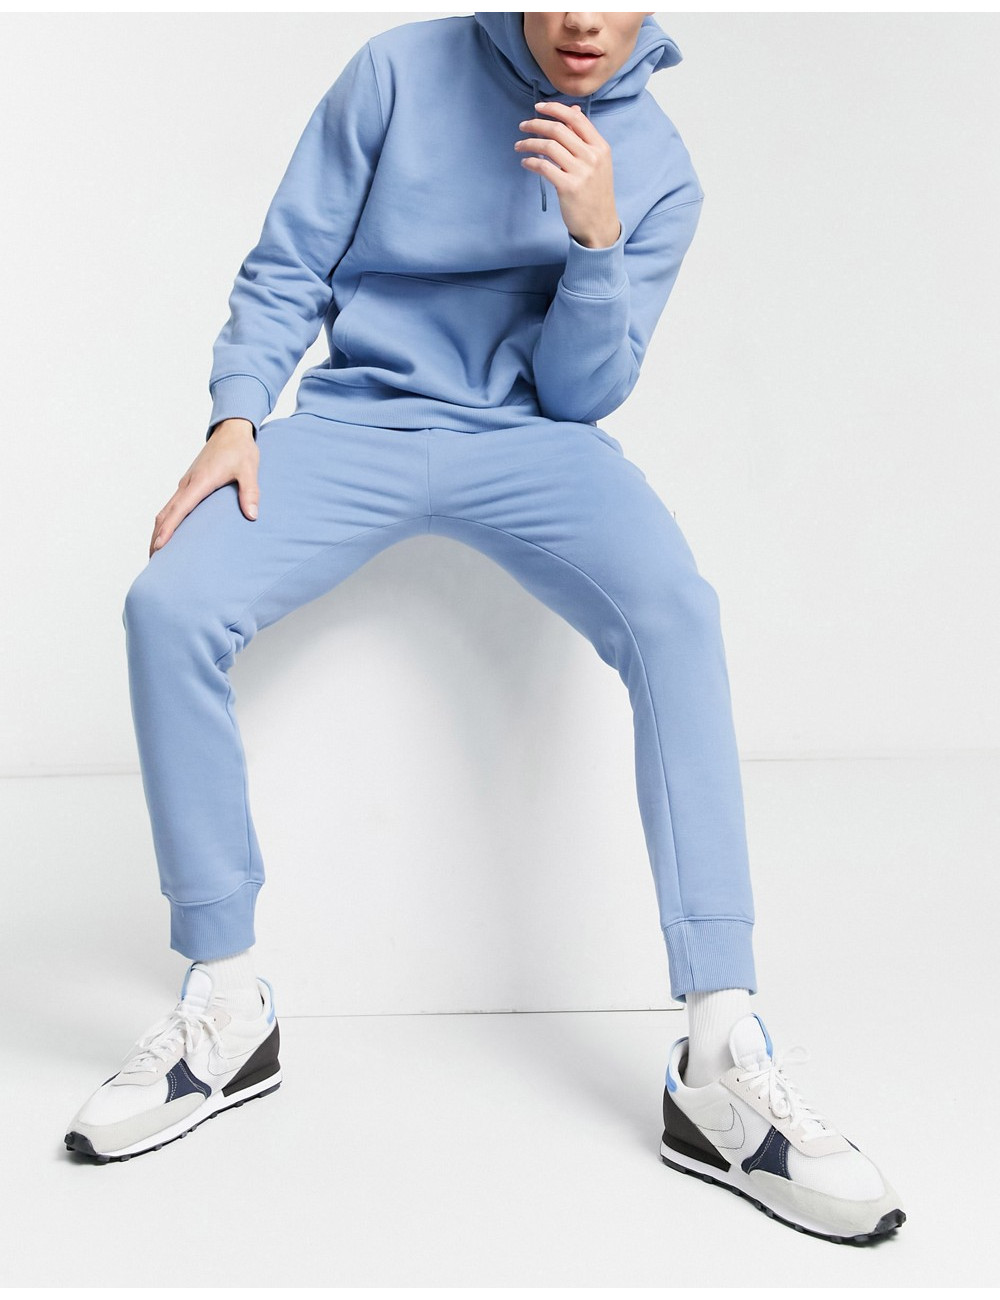 Topman co-ord jogger in blue